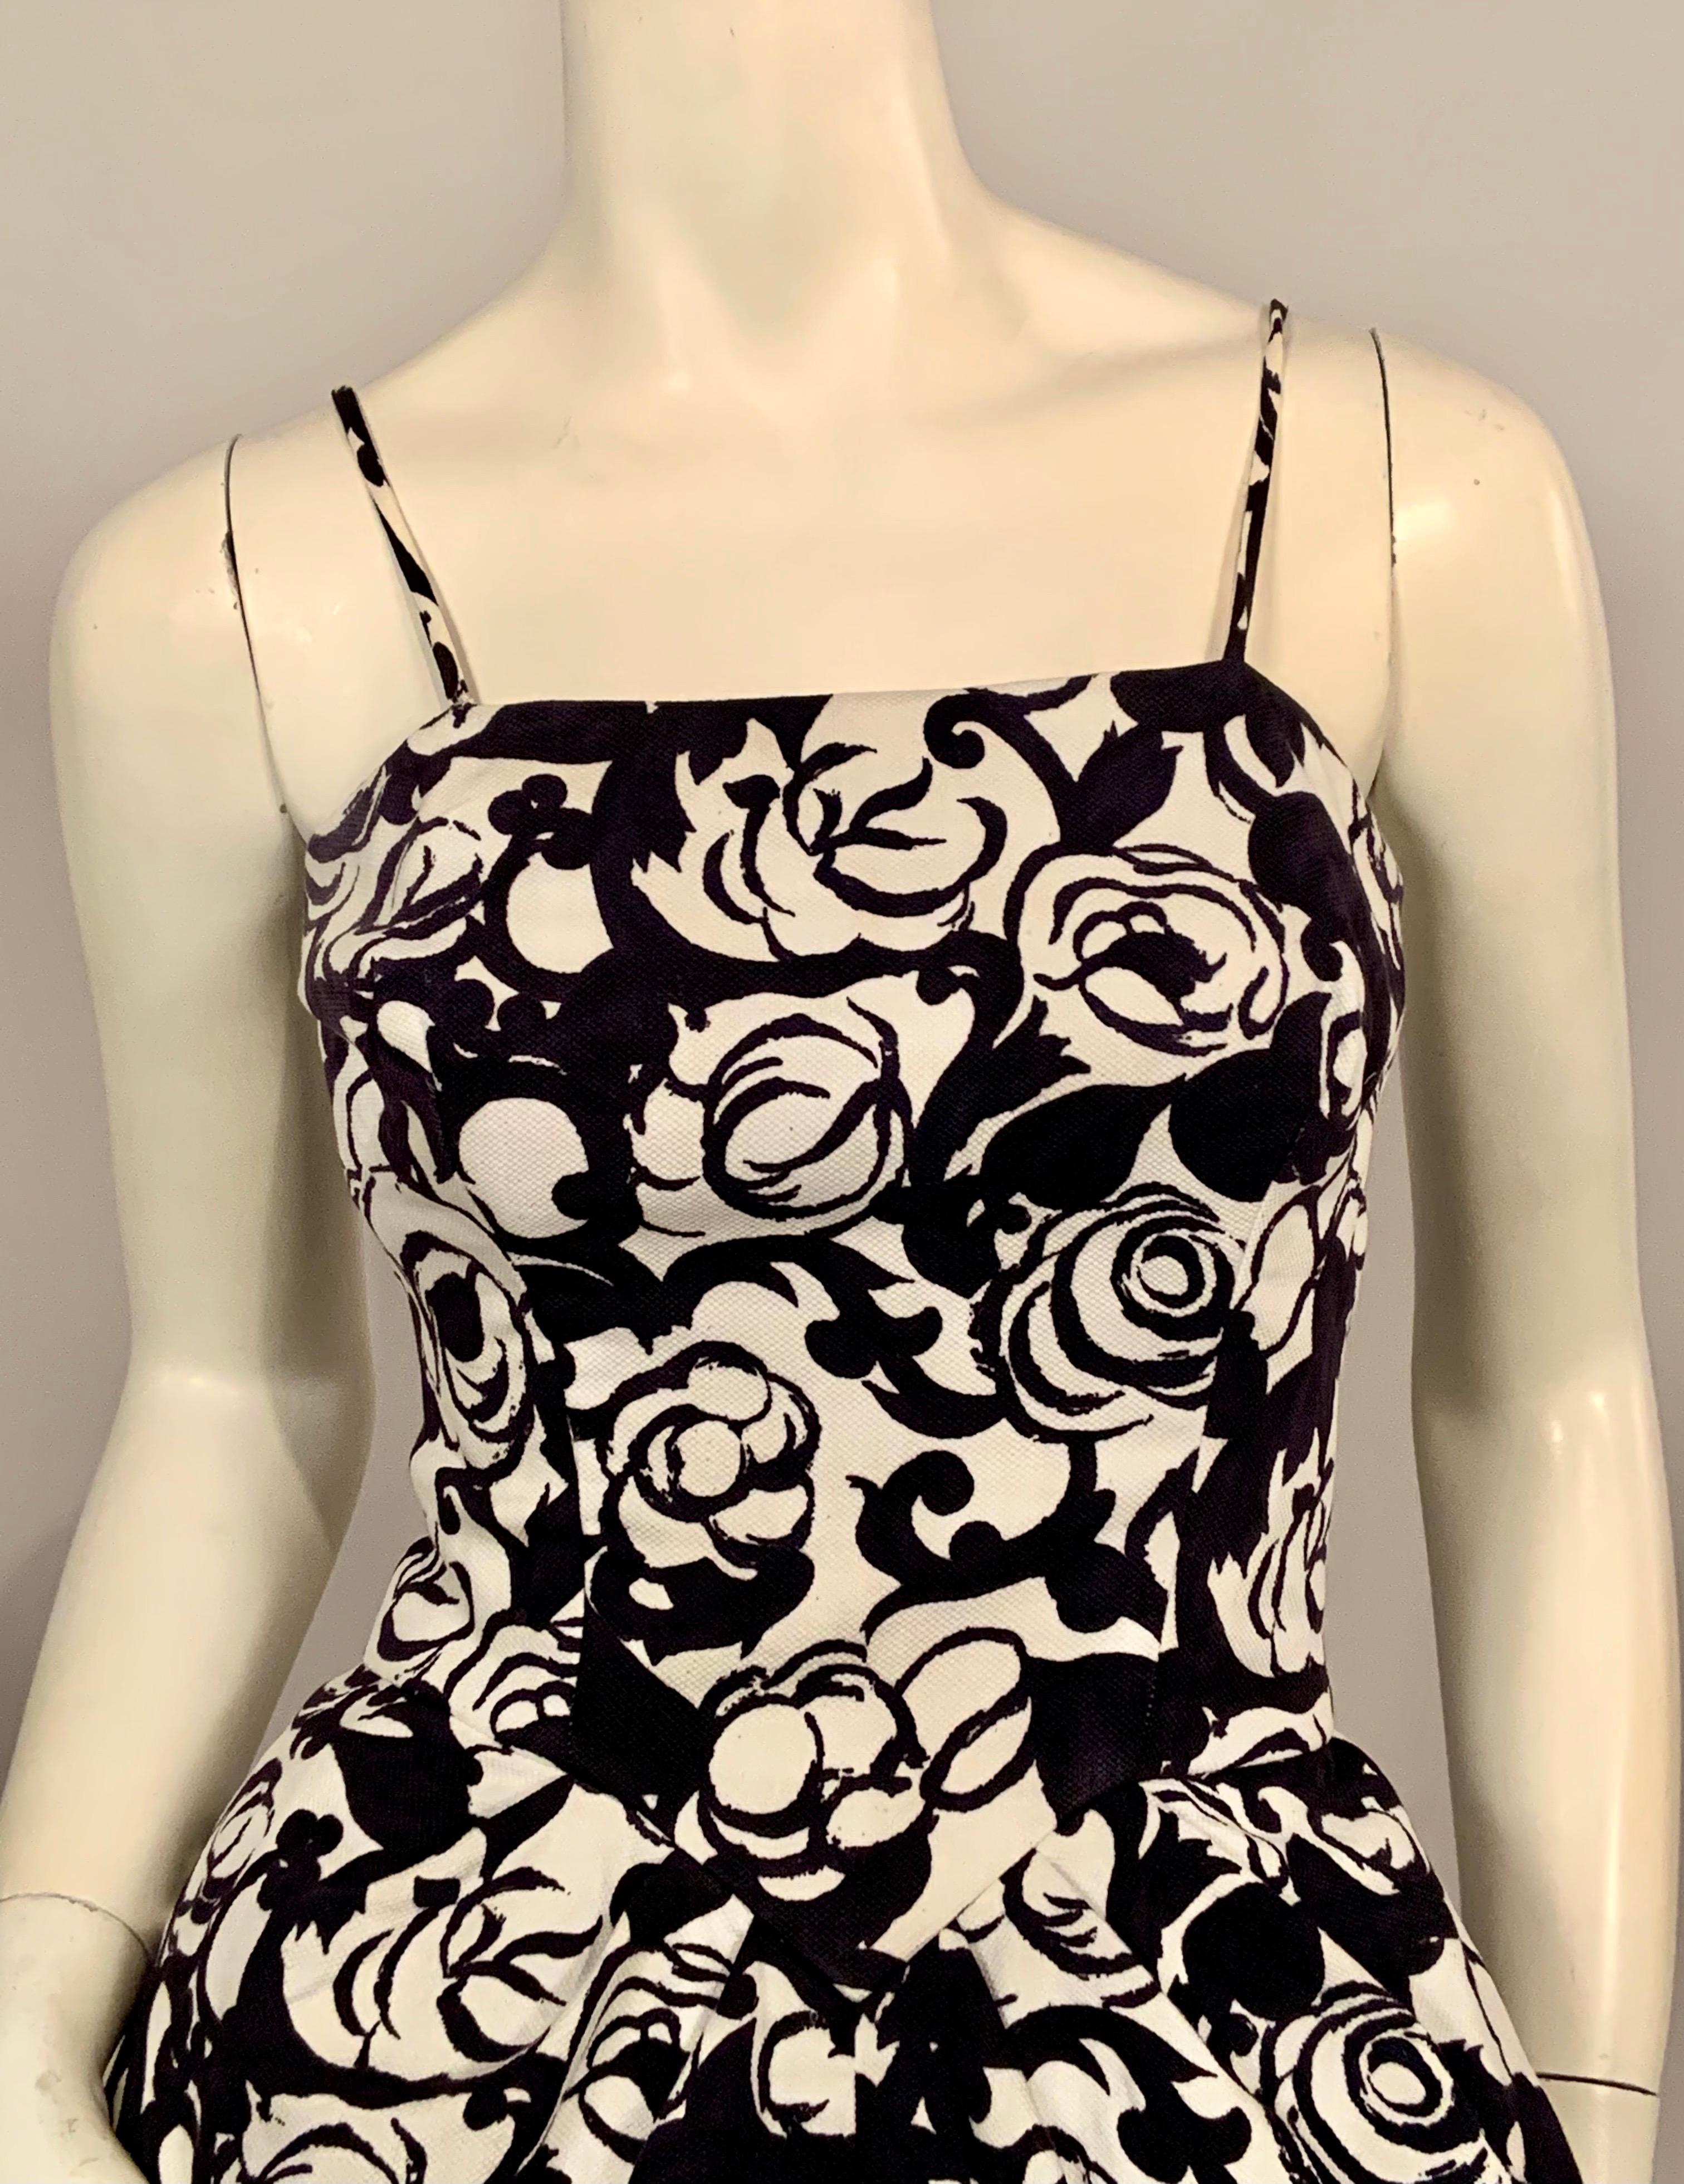 This charming black and white floral print cotton pique summer evening dress will definitely get you noticed.   The dress has spaghetti straps, a fitted bodice with a V shaped, corset style seam above soft pleats in the full skirt.  The skirt gets